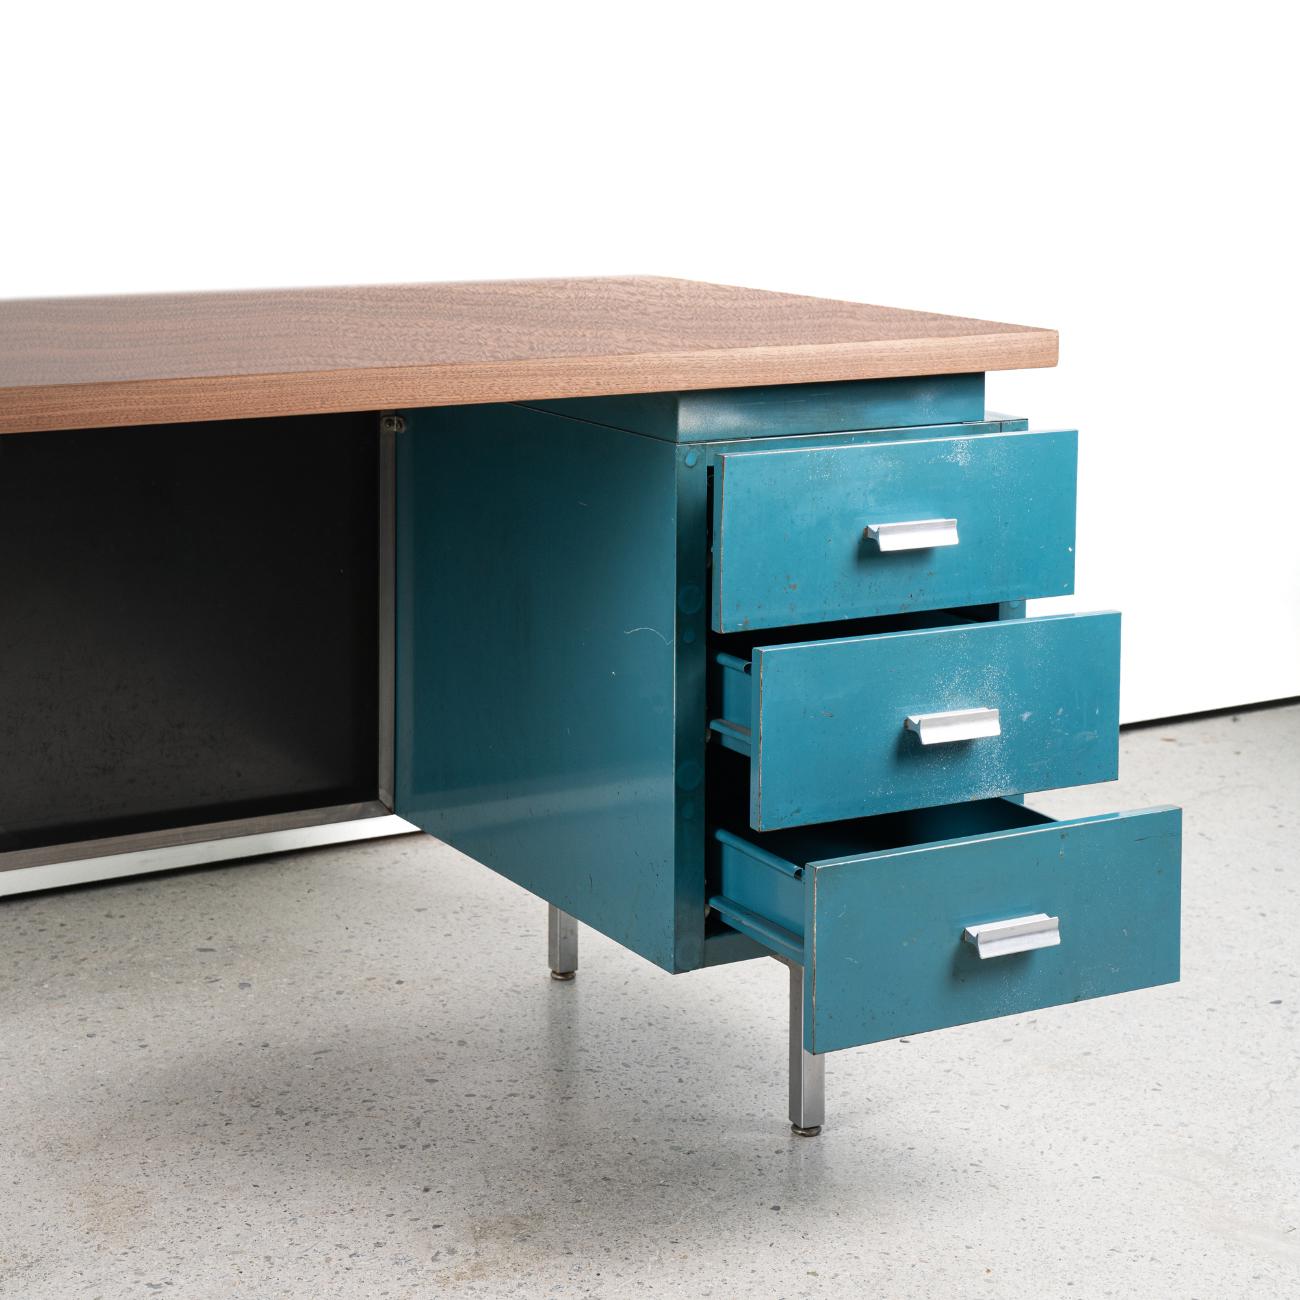 The MMG desk, which was produced for a short period of only 5 years, was designed with 22 parts in a modular form that can be combined according to the user's choice. 
It is often written as a design by Goerge Nelson Associates, but if you trace the